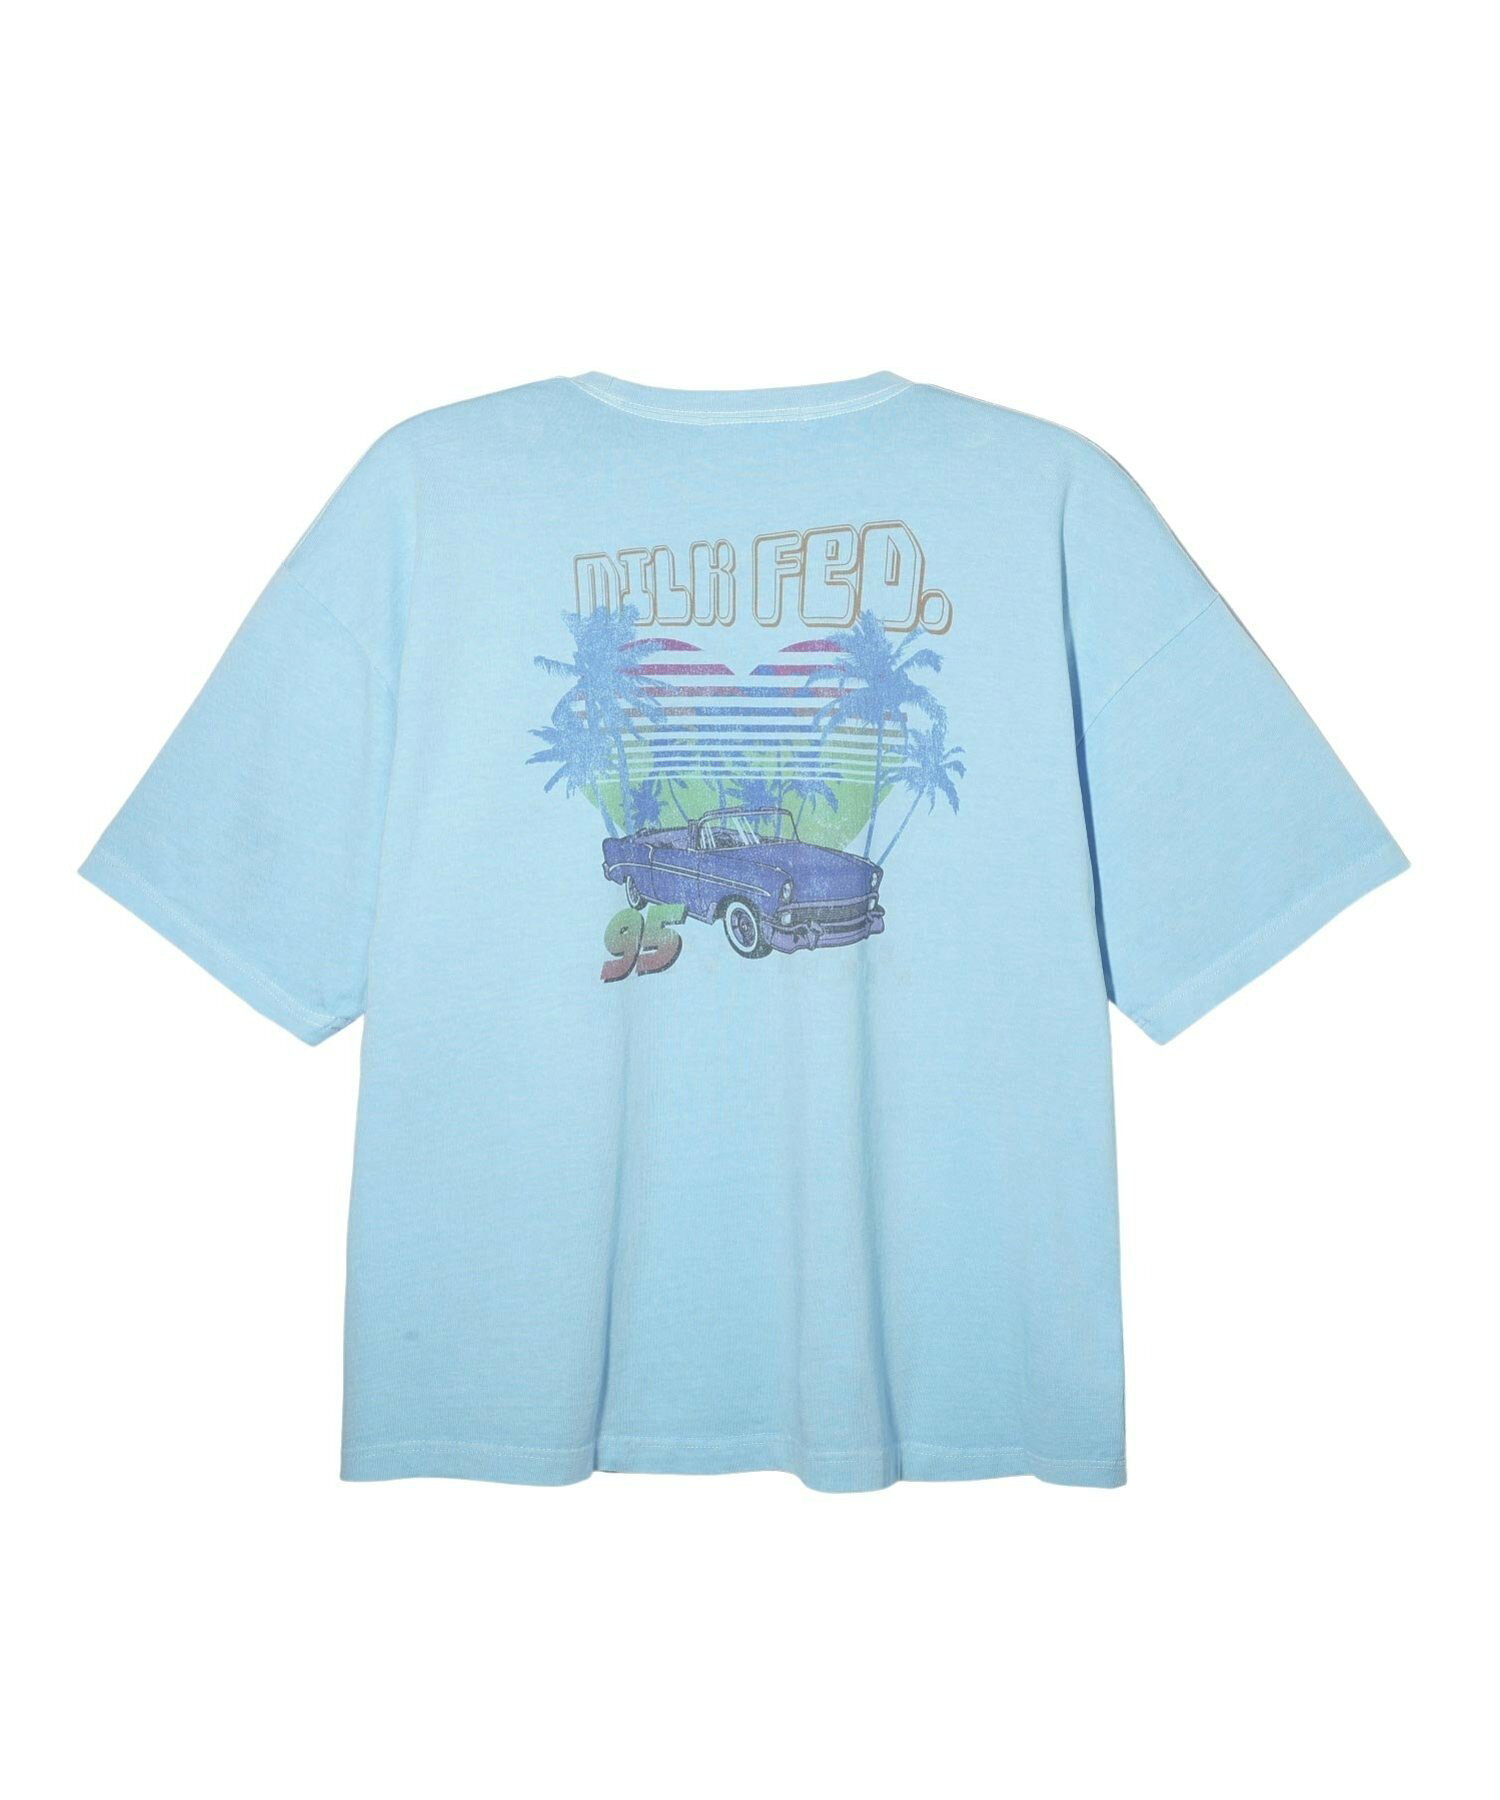 CAR GRAPHIC WIDE S/S TEE MILKFED.